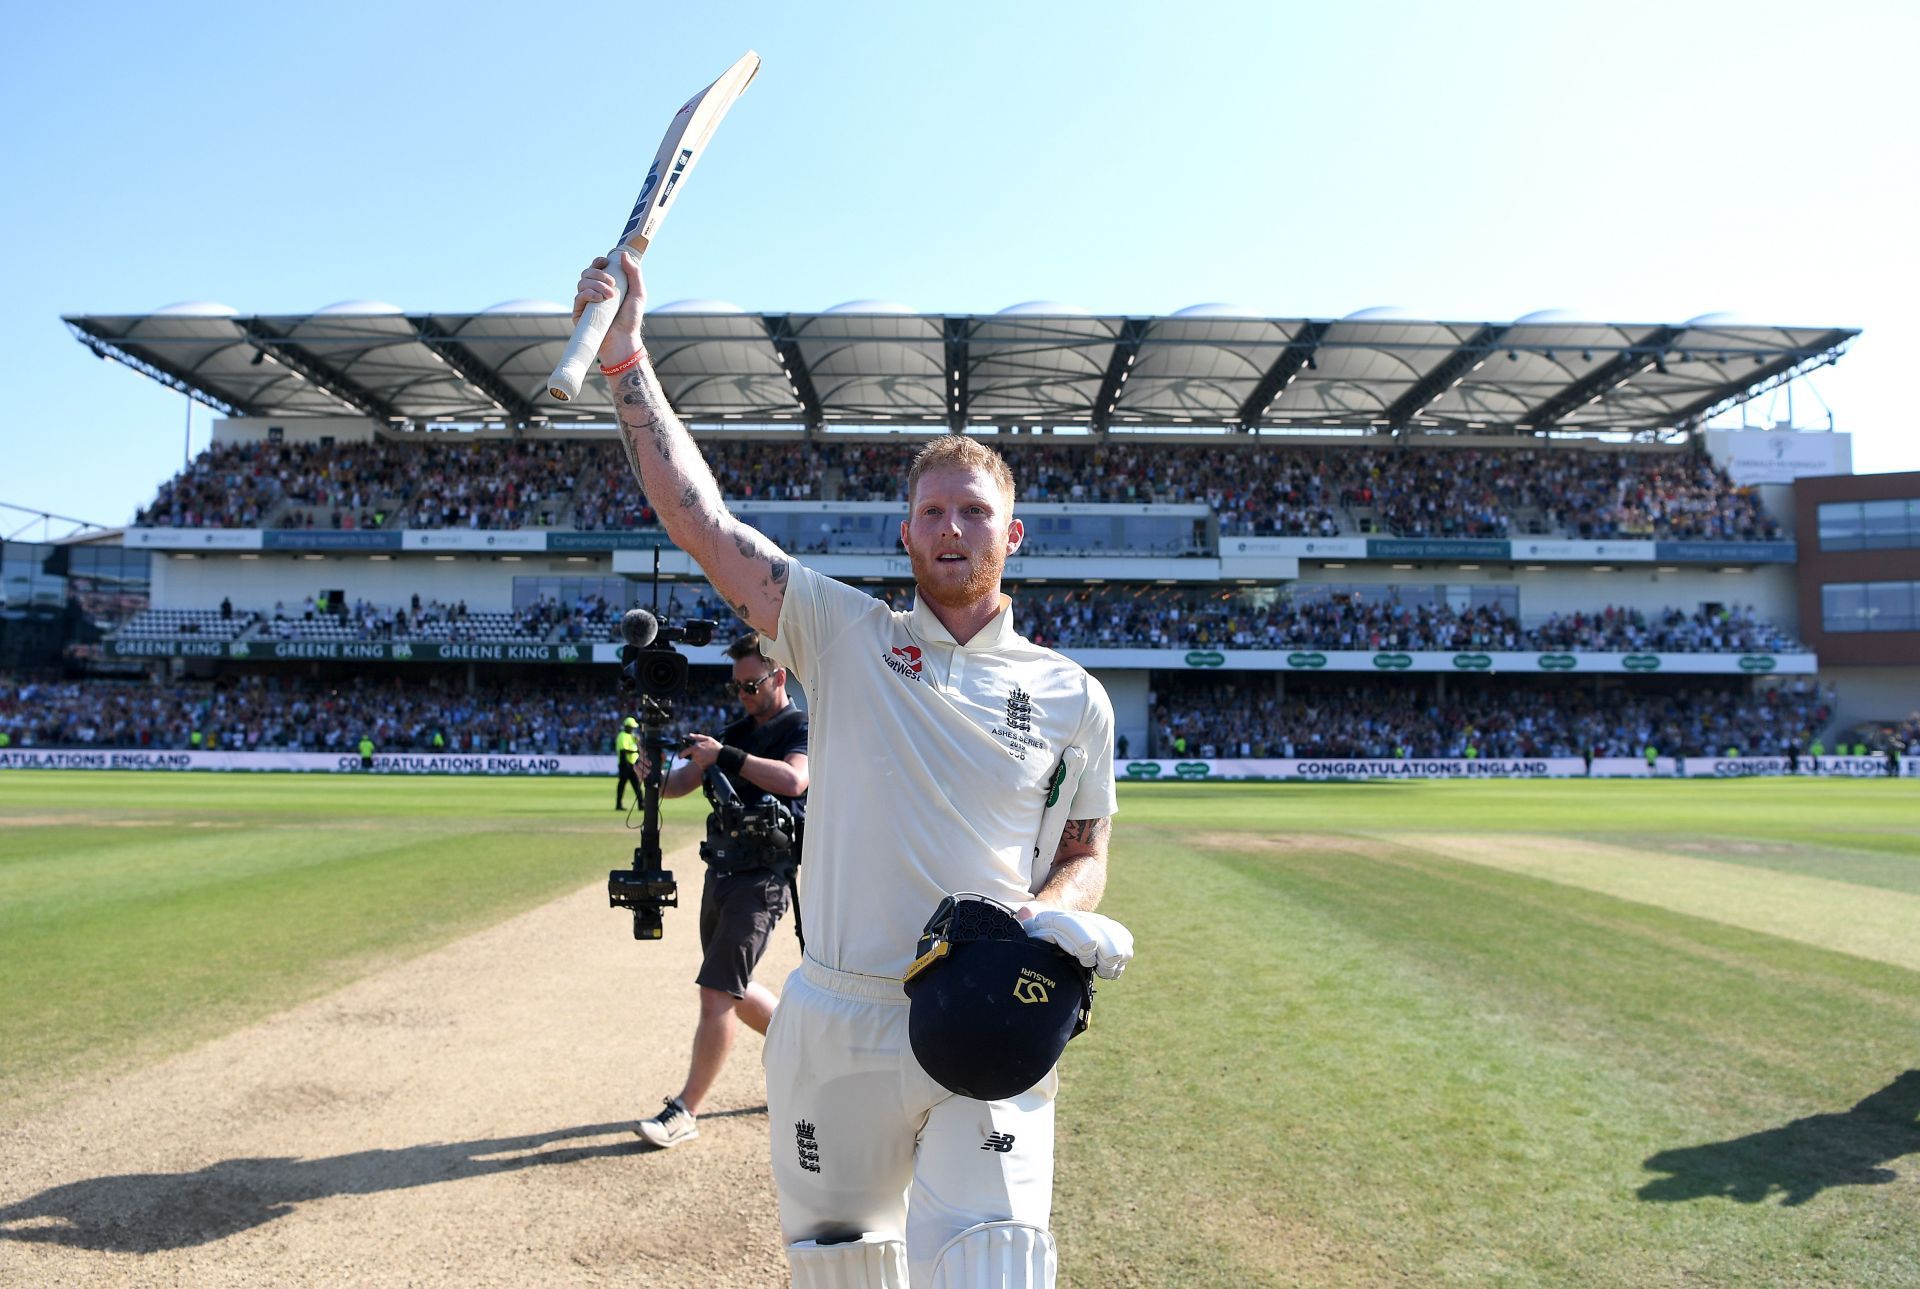 Ben Stokes will likely go under the hammer at IPL Auction 2022